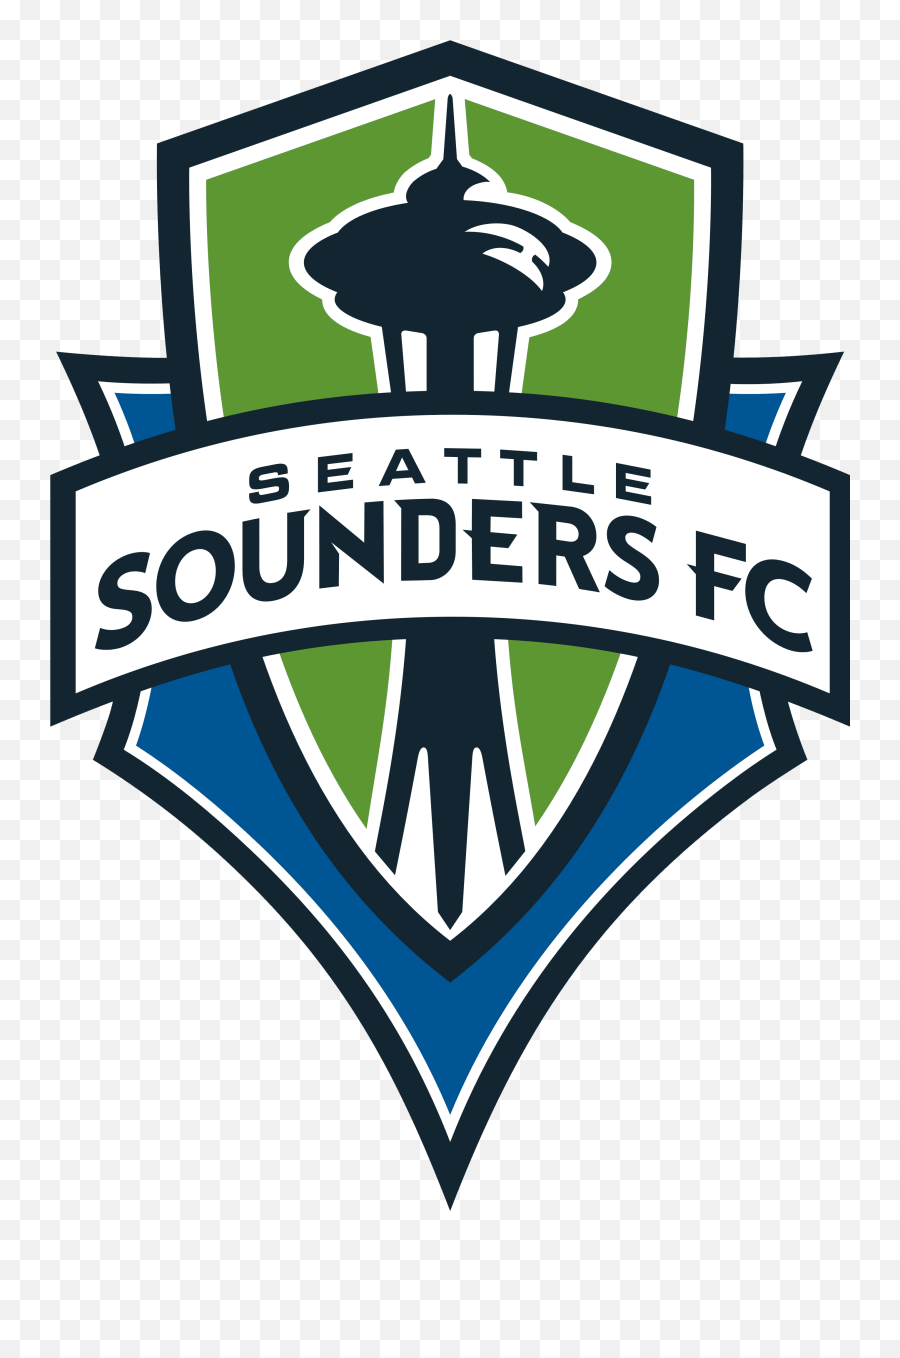 Seattle Sounders Fc Logo Png - Seattle Sounders Fc,Mariners Logo Png